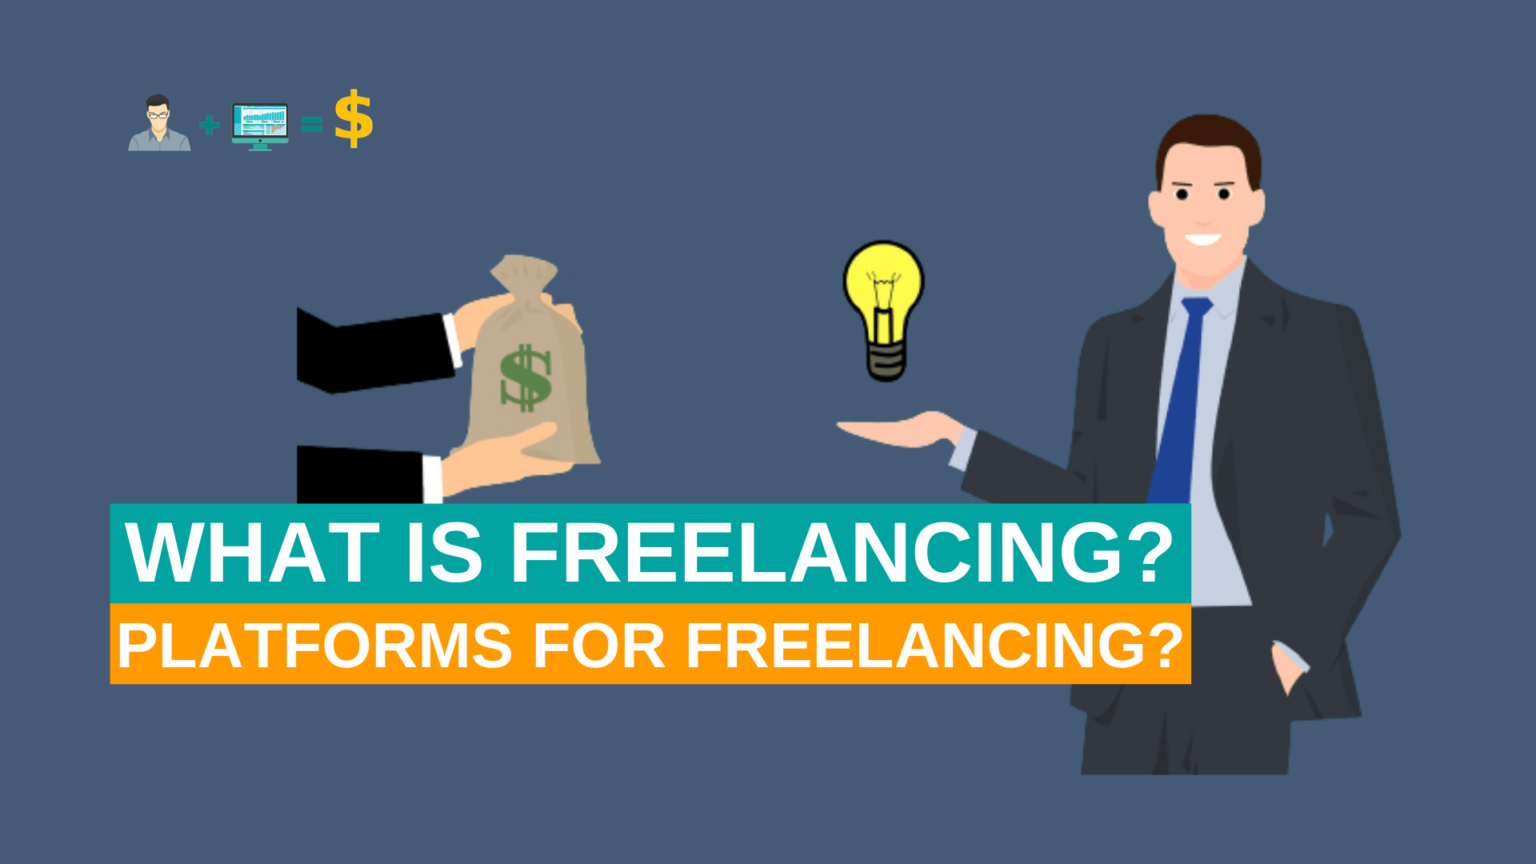 What is Freelancing and What are the Platforms for Freelancing